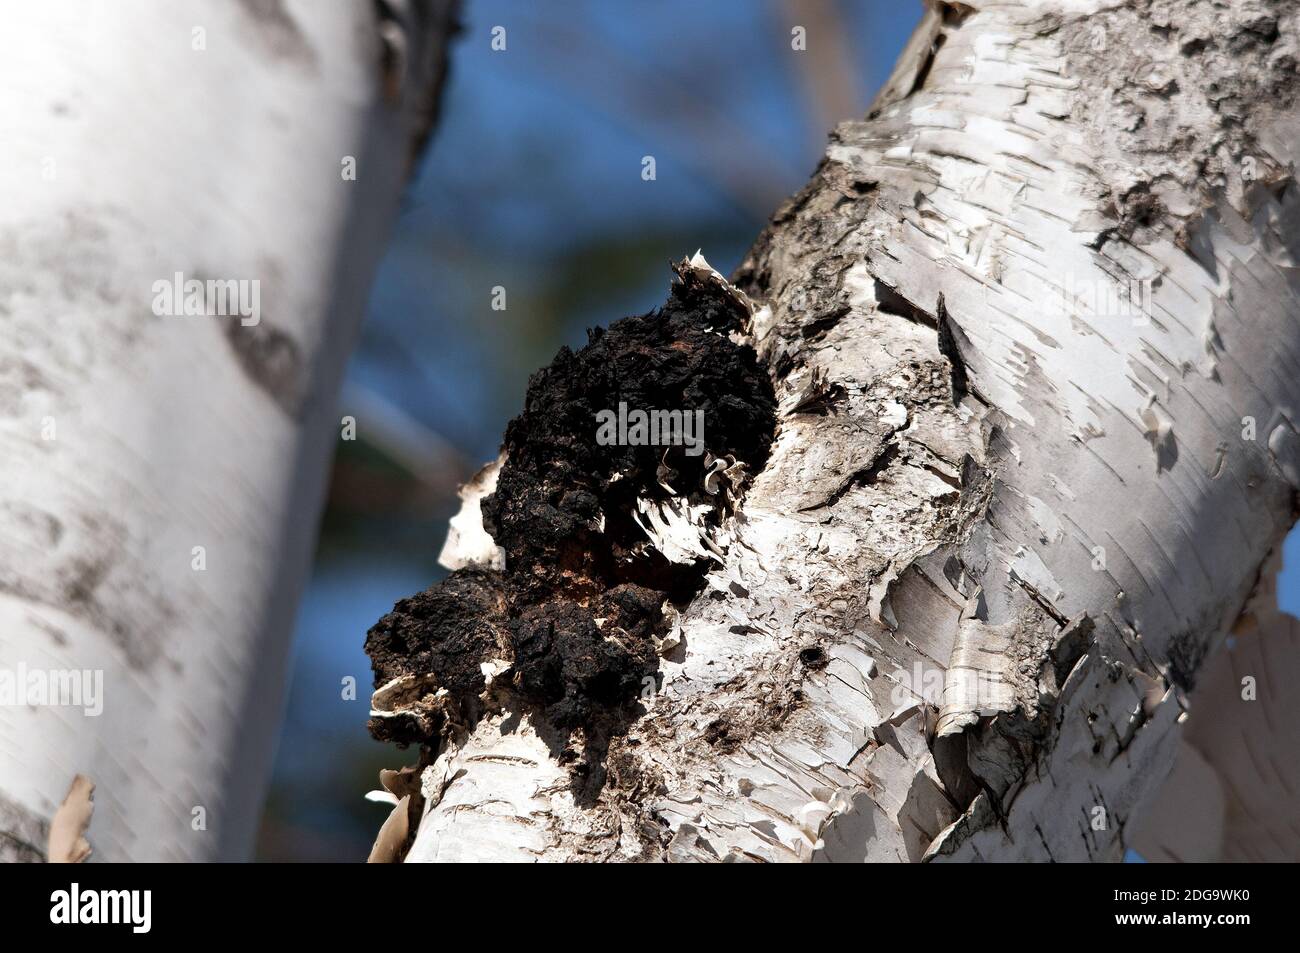 Chaga Mushroom growing on the side of a birch tree in the forest. Image. Picture. Portrait. Stock Photo